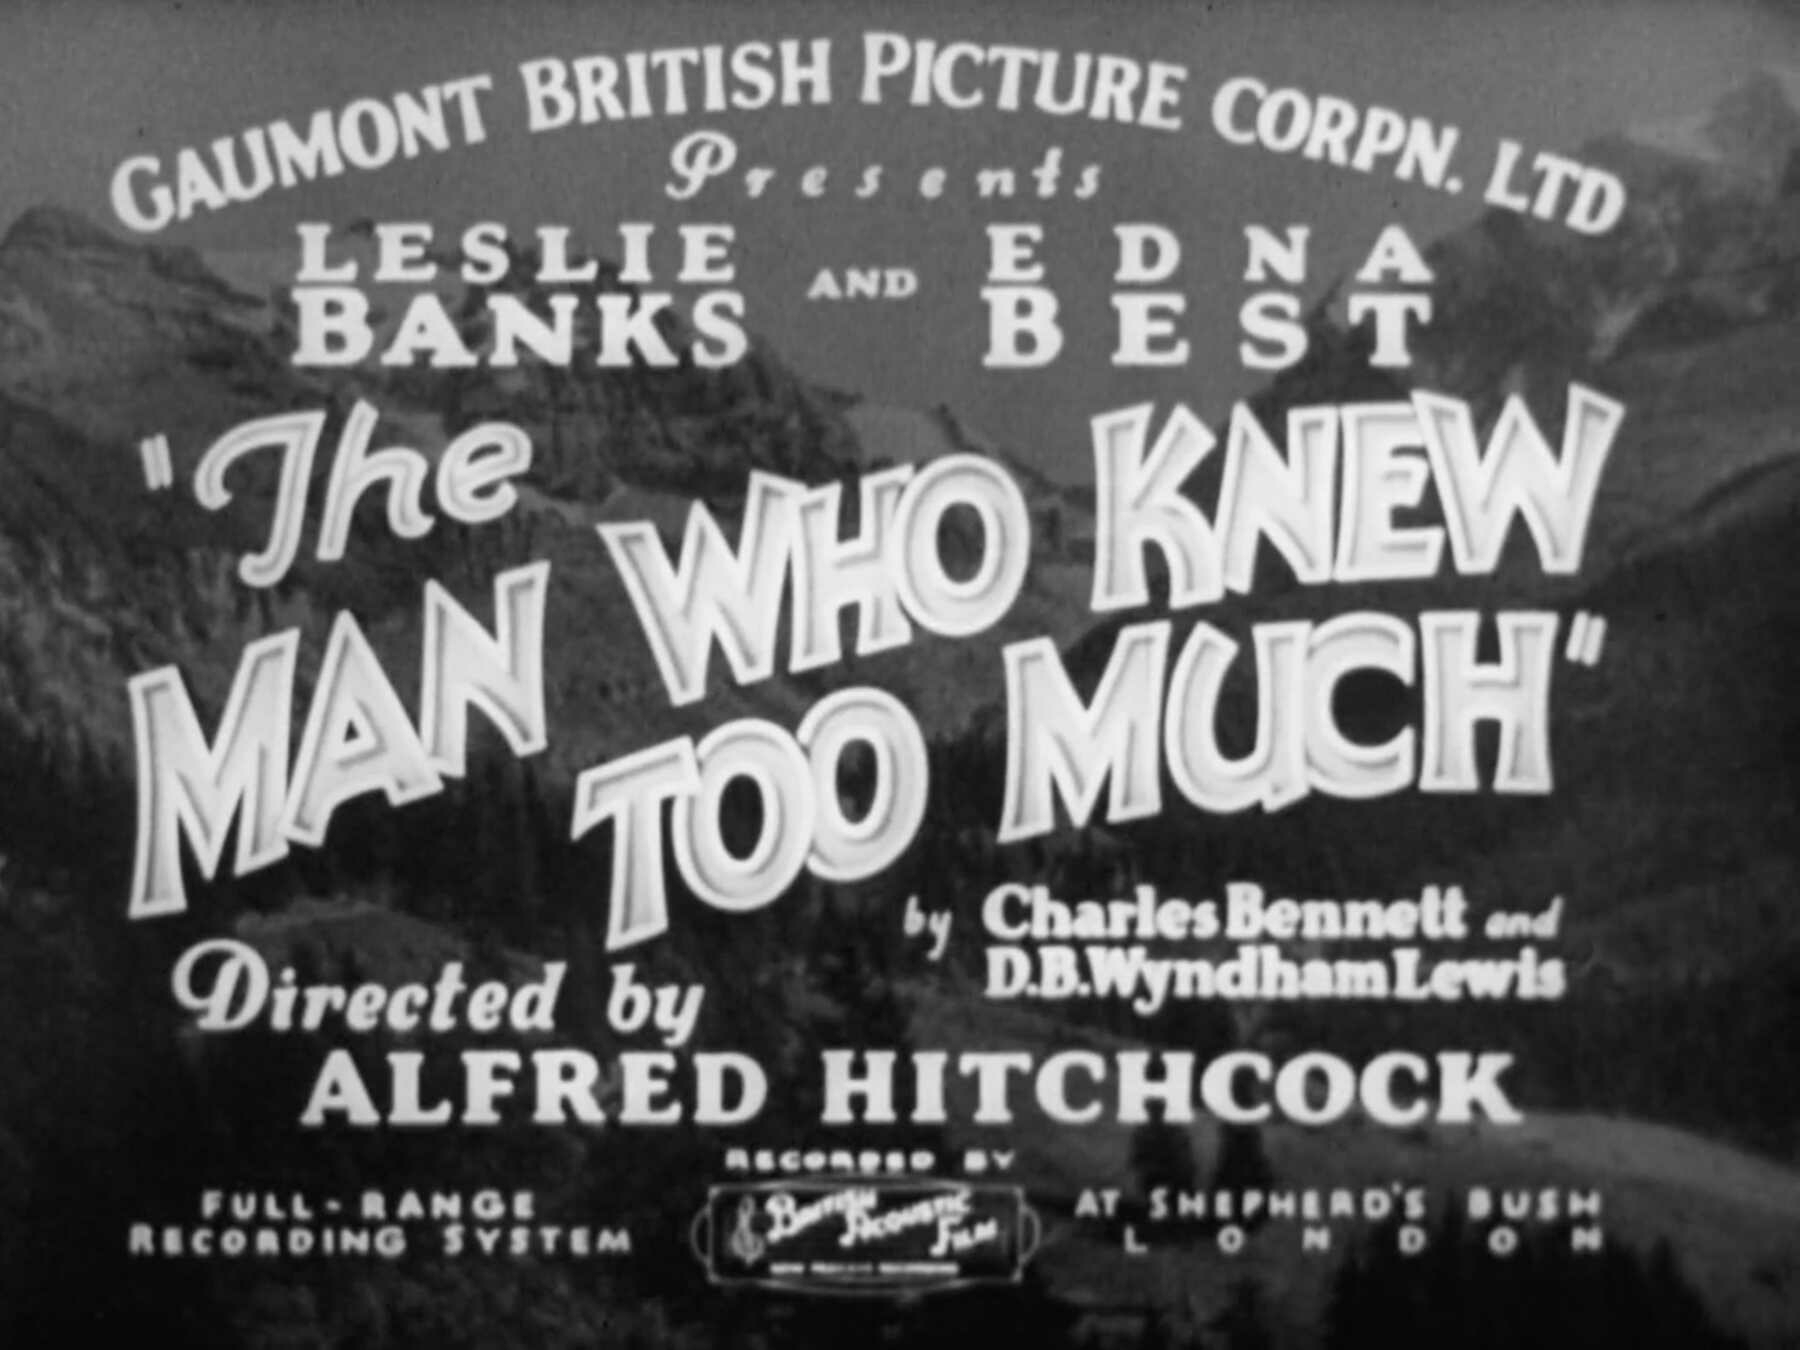 The title card for the Alfred Hitchcock film, The Man Who Knew Too Much.